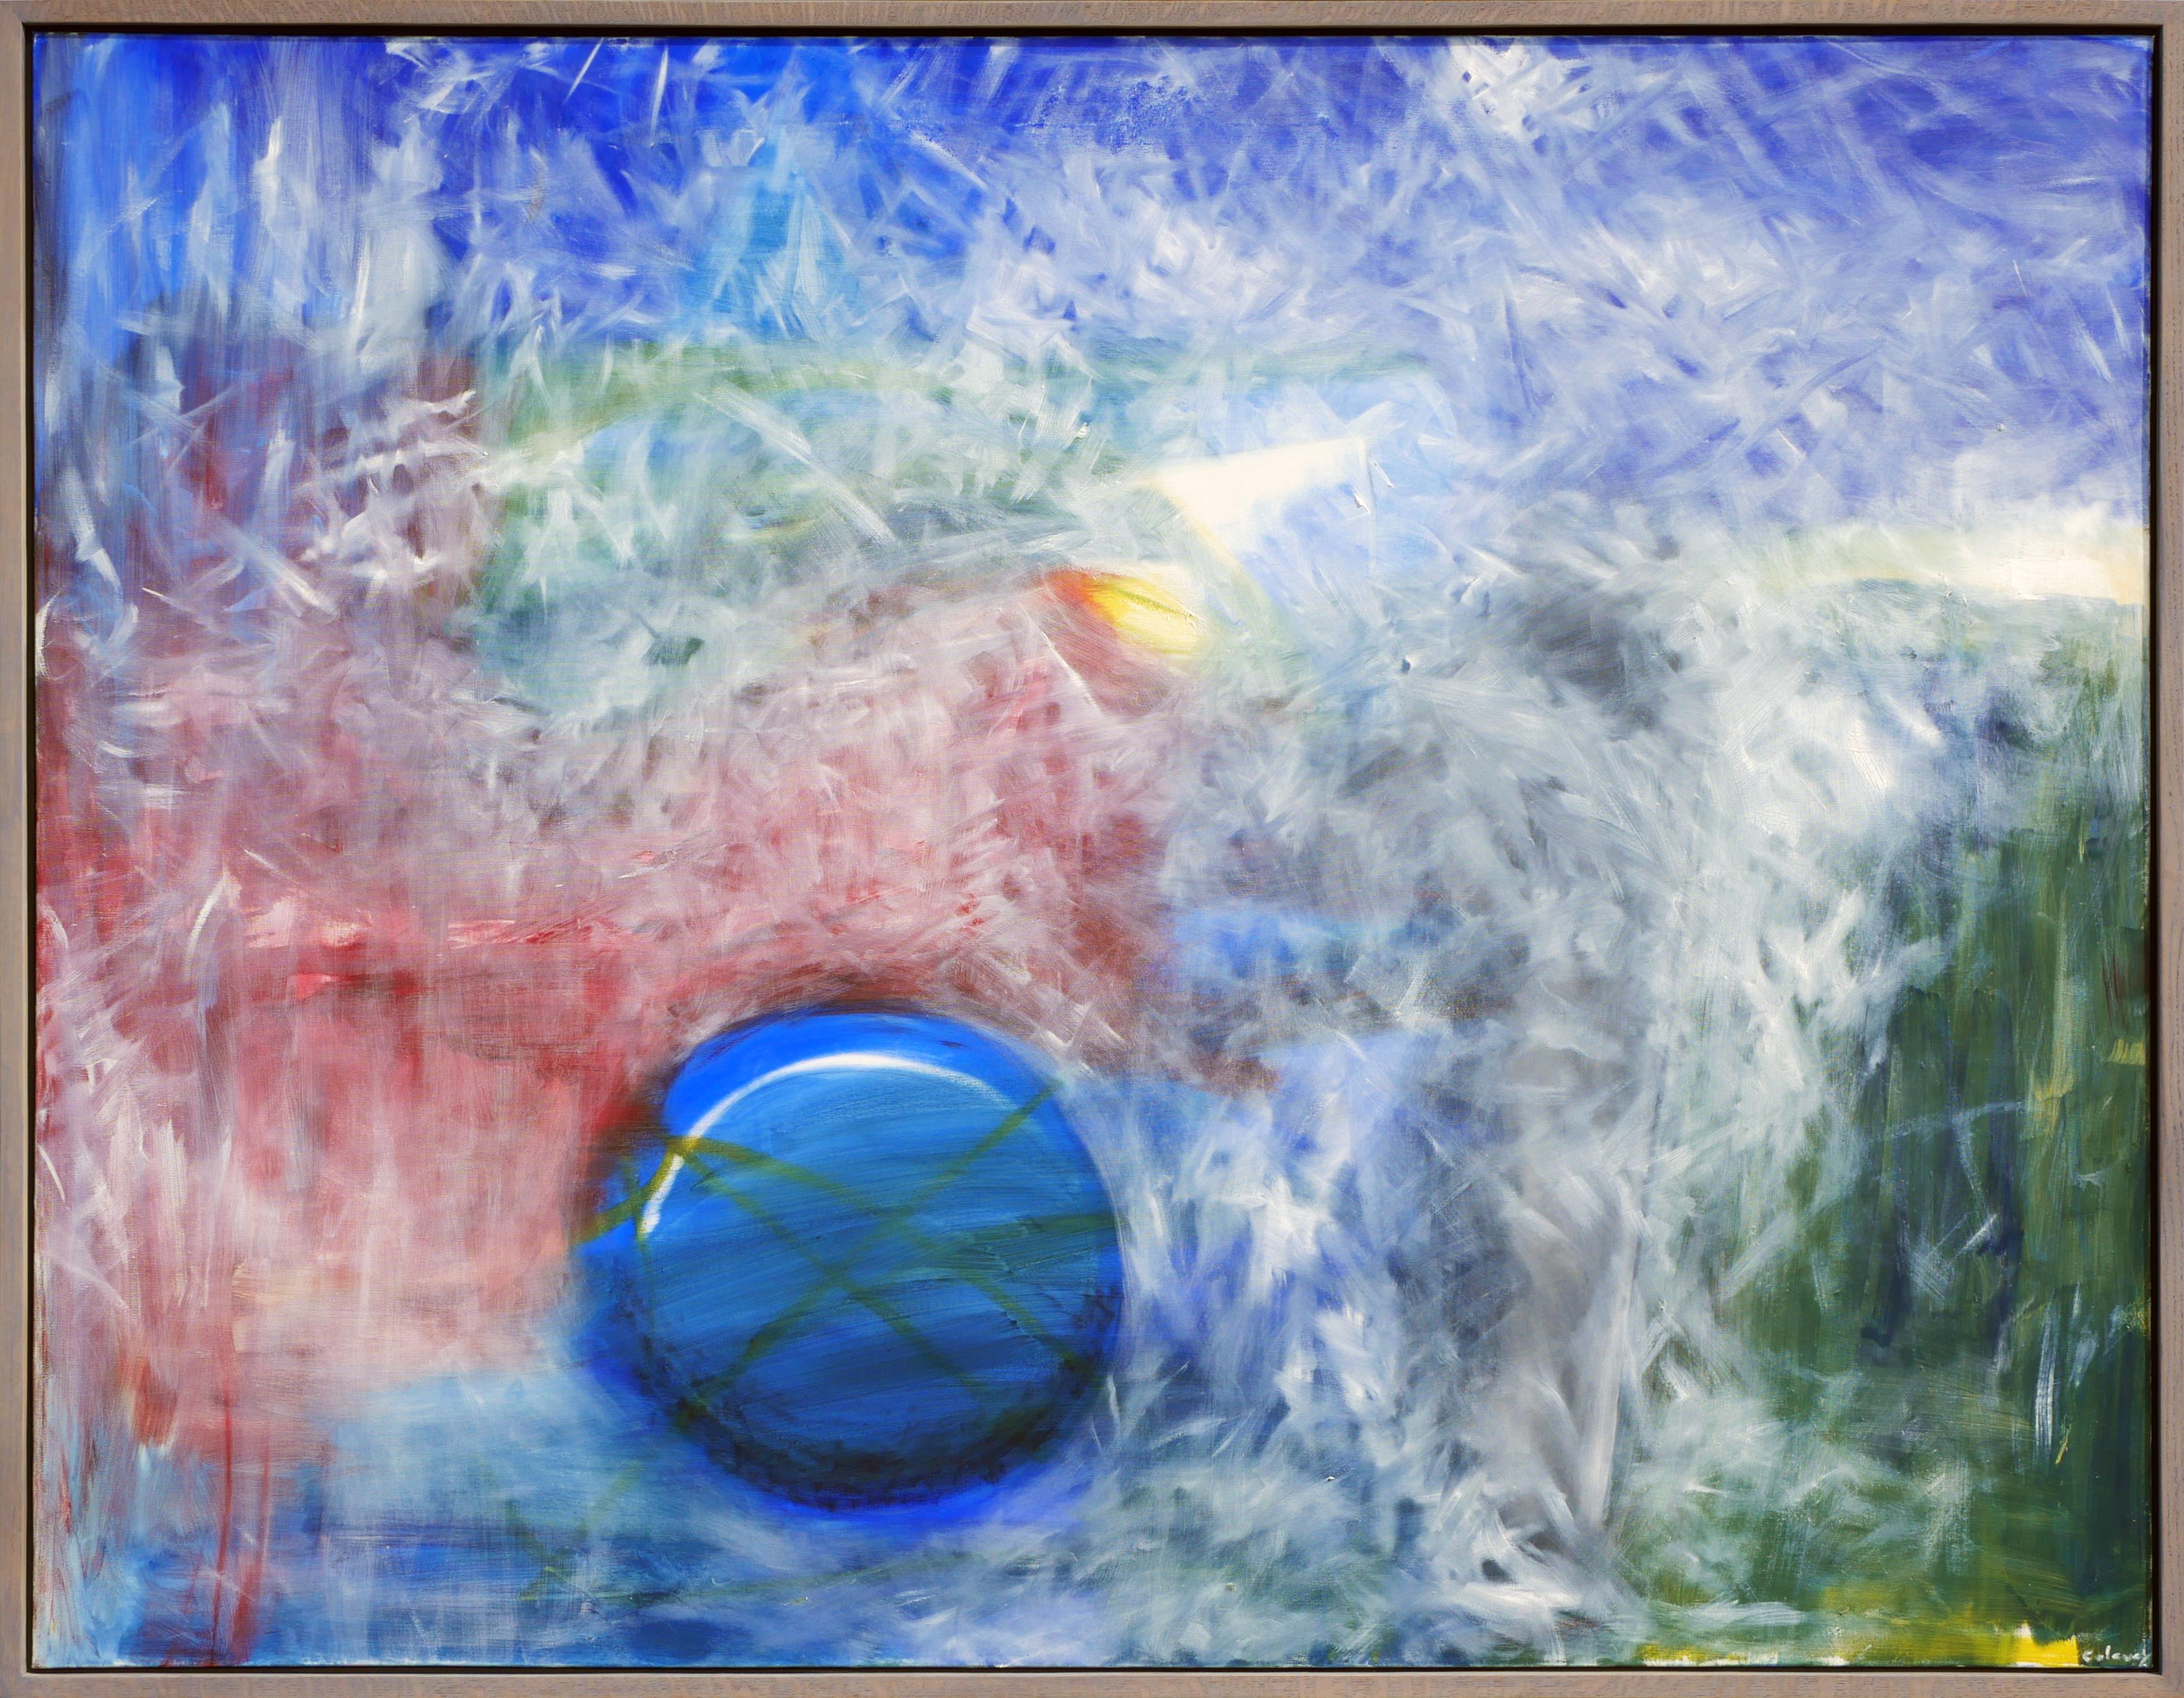 John Calaway Abstract Painting - Blue, Red, and Green Abstract Expressionist Painting with Geometric Elements